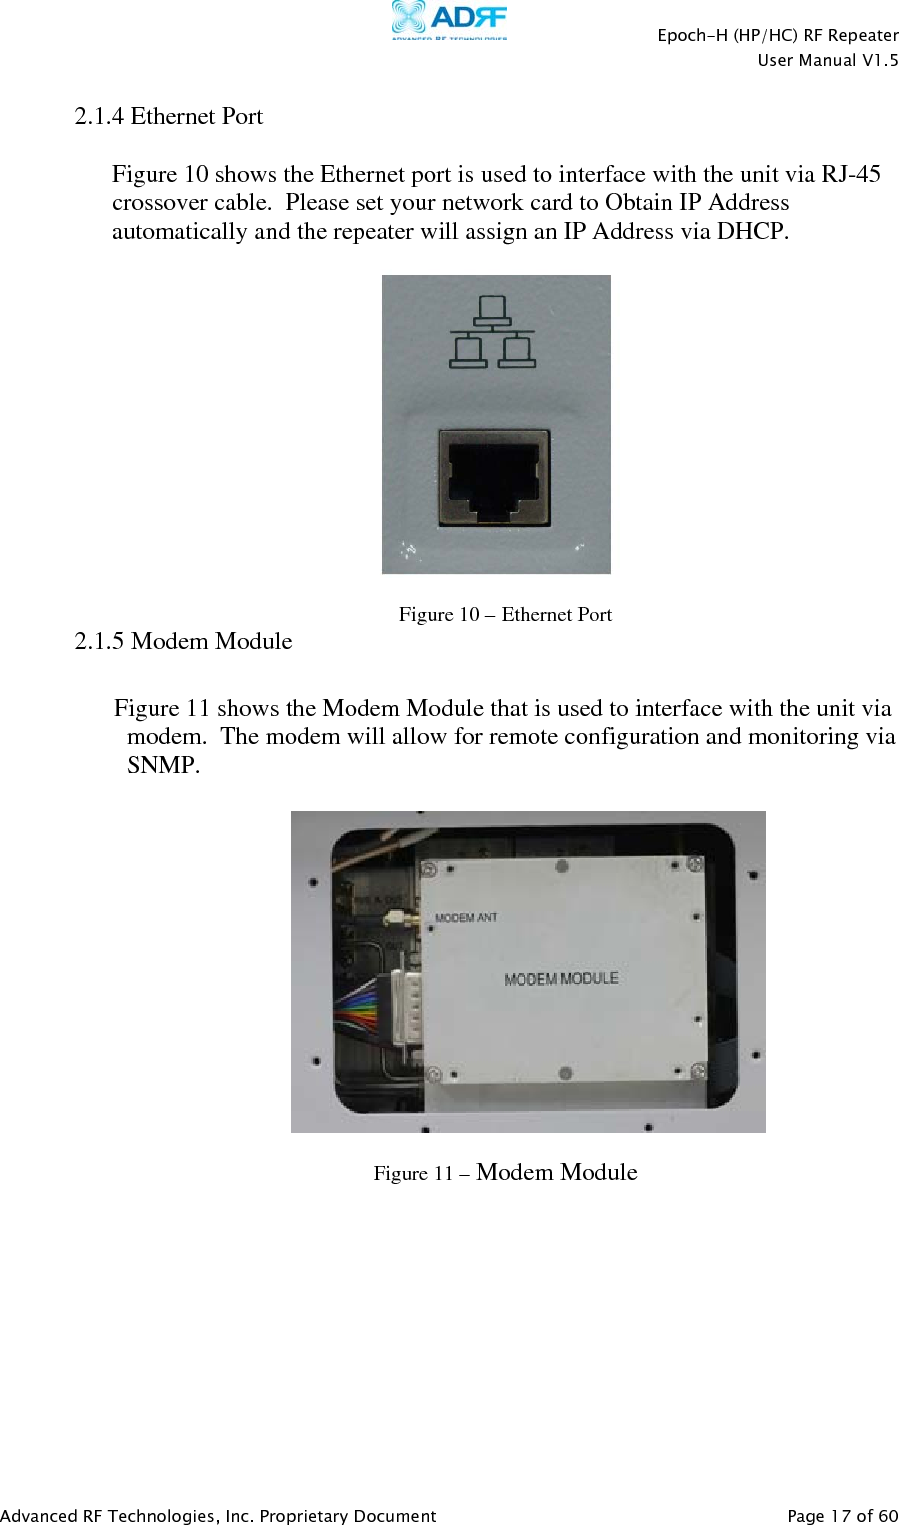    Epoch-H (HP/HC) RF Repeater  User Manual V1.5  Advanced RF Technologies, Inc. Proprietary Document   Page 17 of 60   2.1.4 Ethernet Port   Figure 10 shows the Ethernet port is used to interface with the unit via RJ-45 crossover cable.  Please set your network card to Obtain IP Address automatically and the repeater will assign an IP Address via DHCP.    Figure 10 – Ethernet Port  2.1.5 Modem Module  Figure 11 shows the Modem Module that is used to interface with the unit via modem.  The modem will allow for remote configuration and monitoring via SNMP.    Figure 11 – Modem Module   